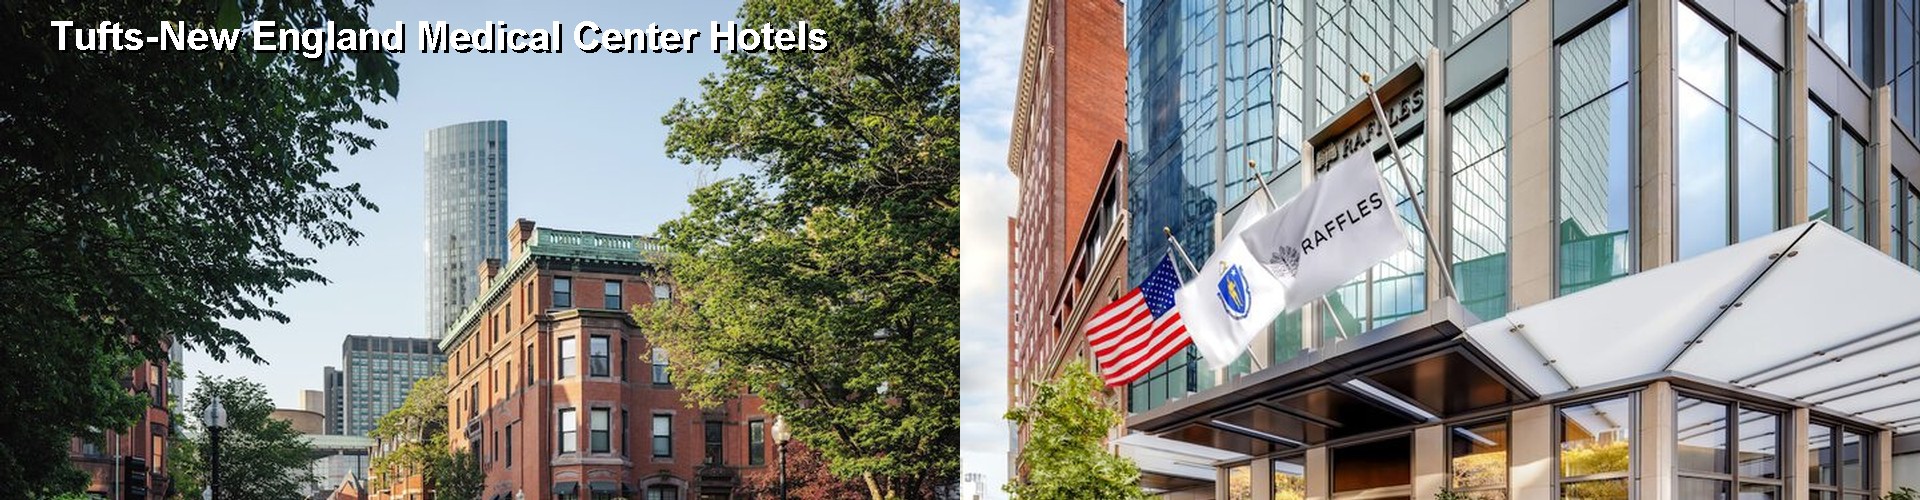 5 Best Hotels near Tufts-New England Medical Center